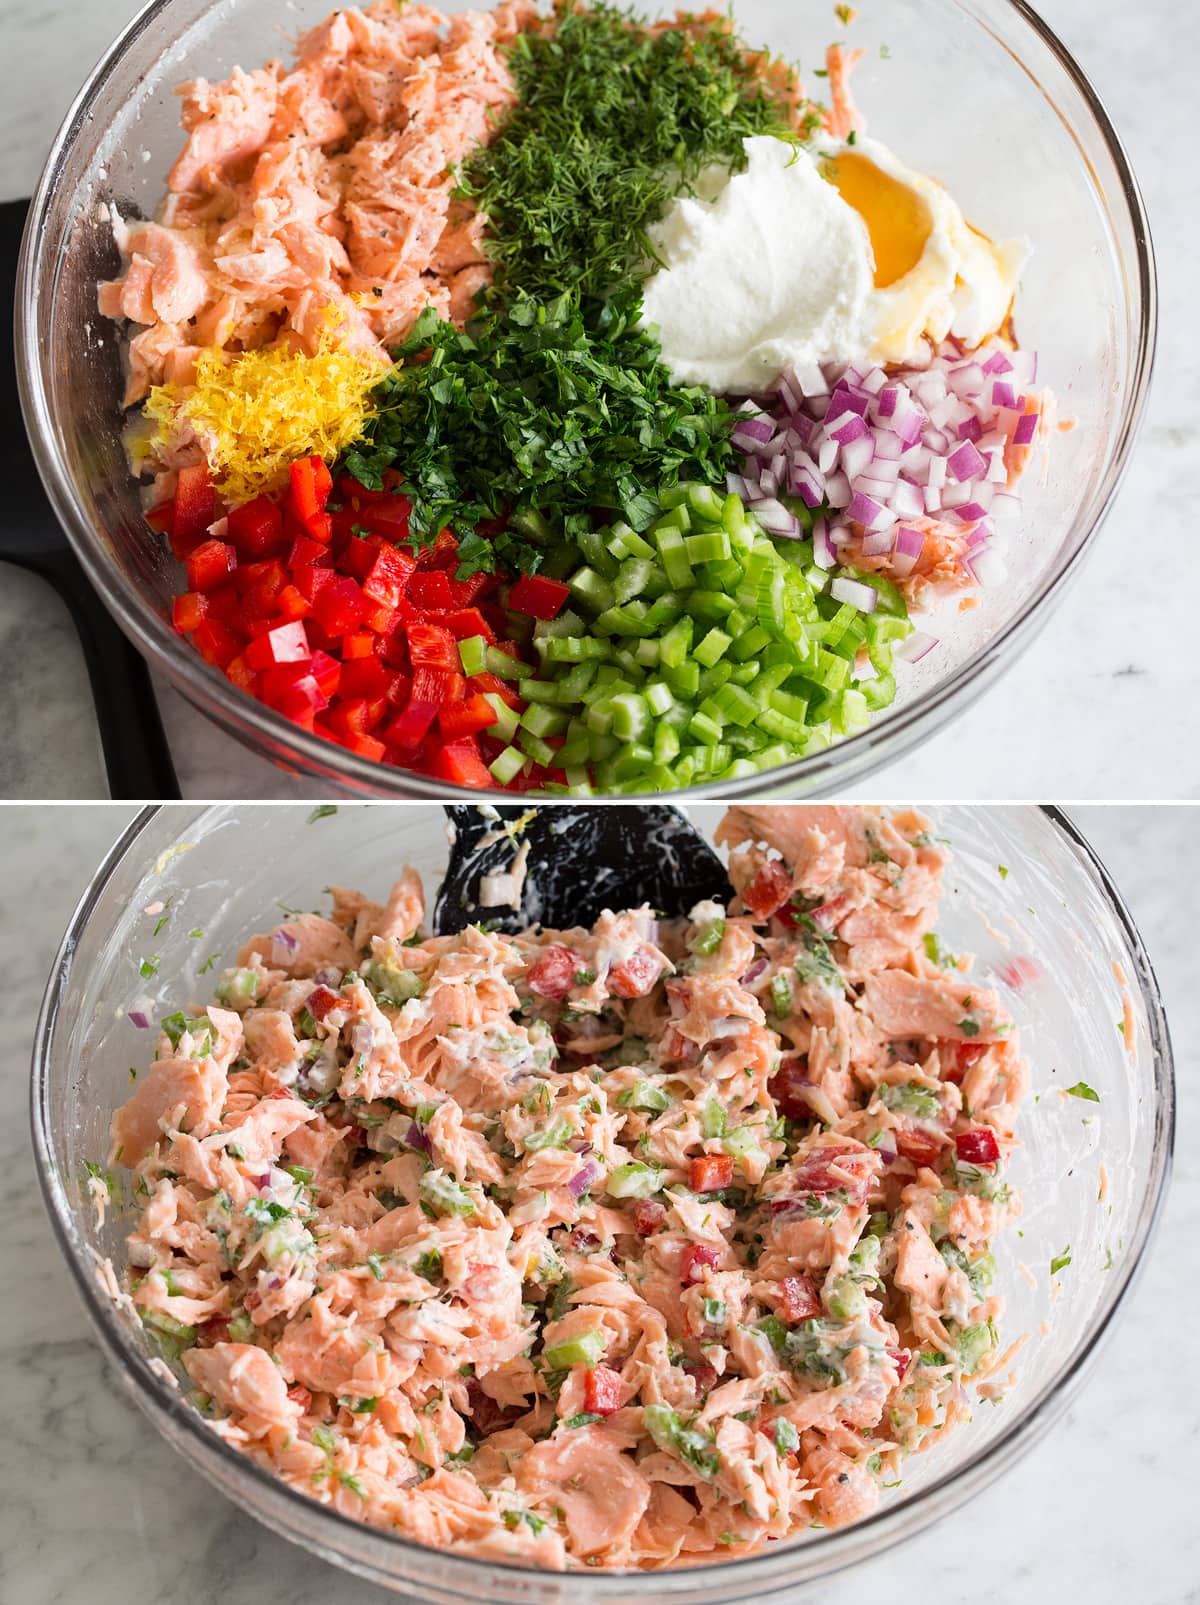 Salmon salad shown before and after mixing in a glass bowl.